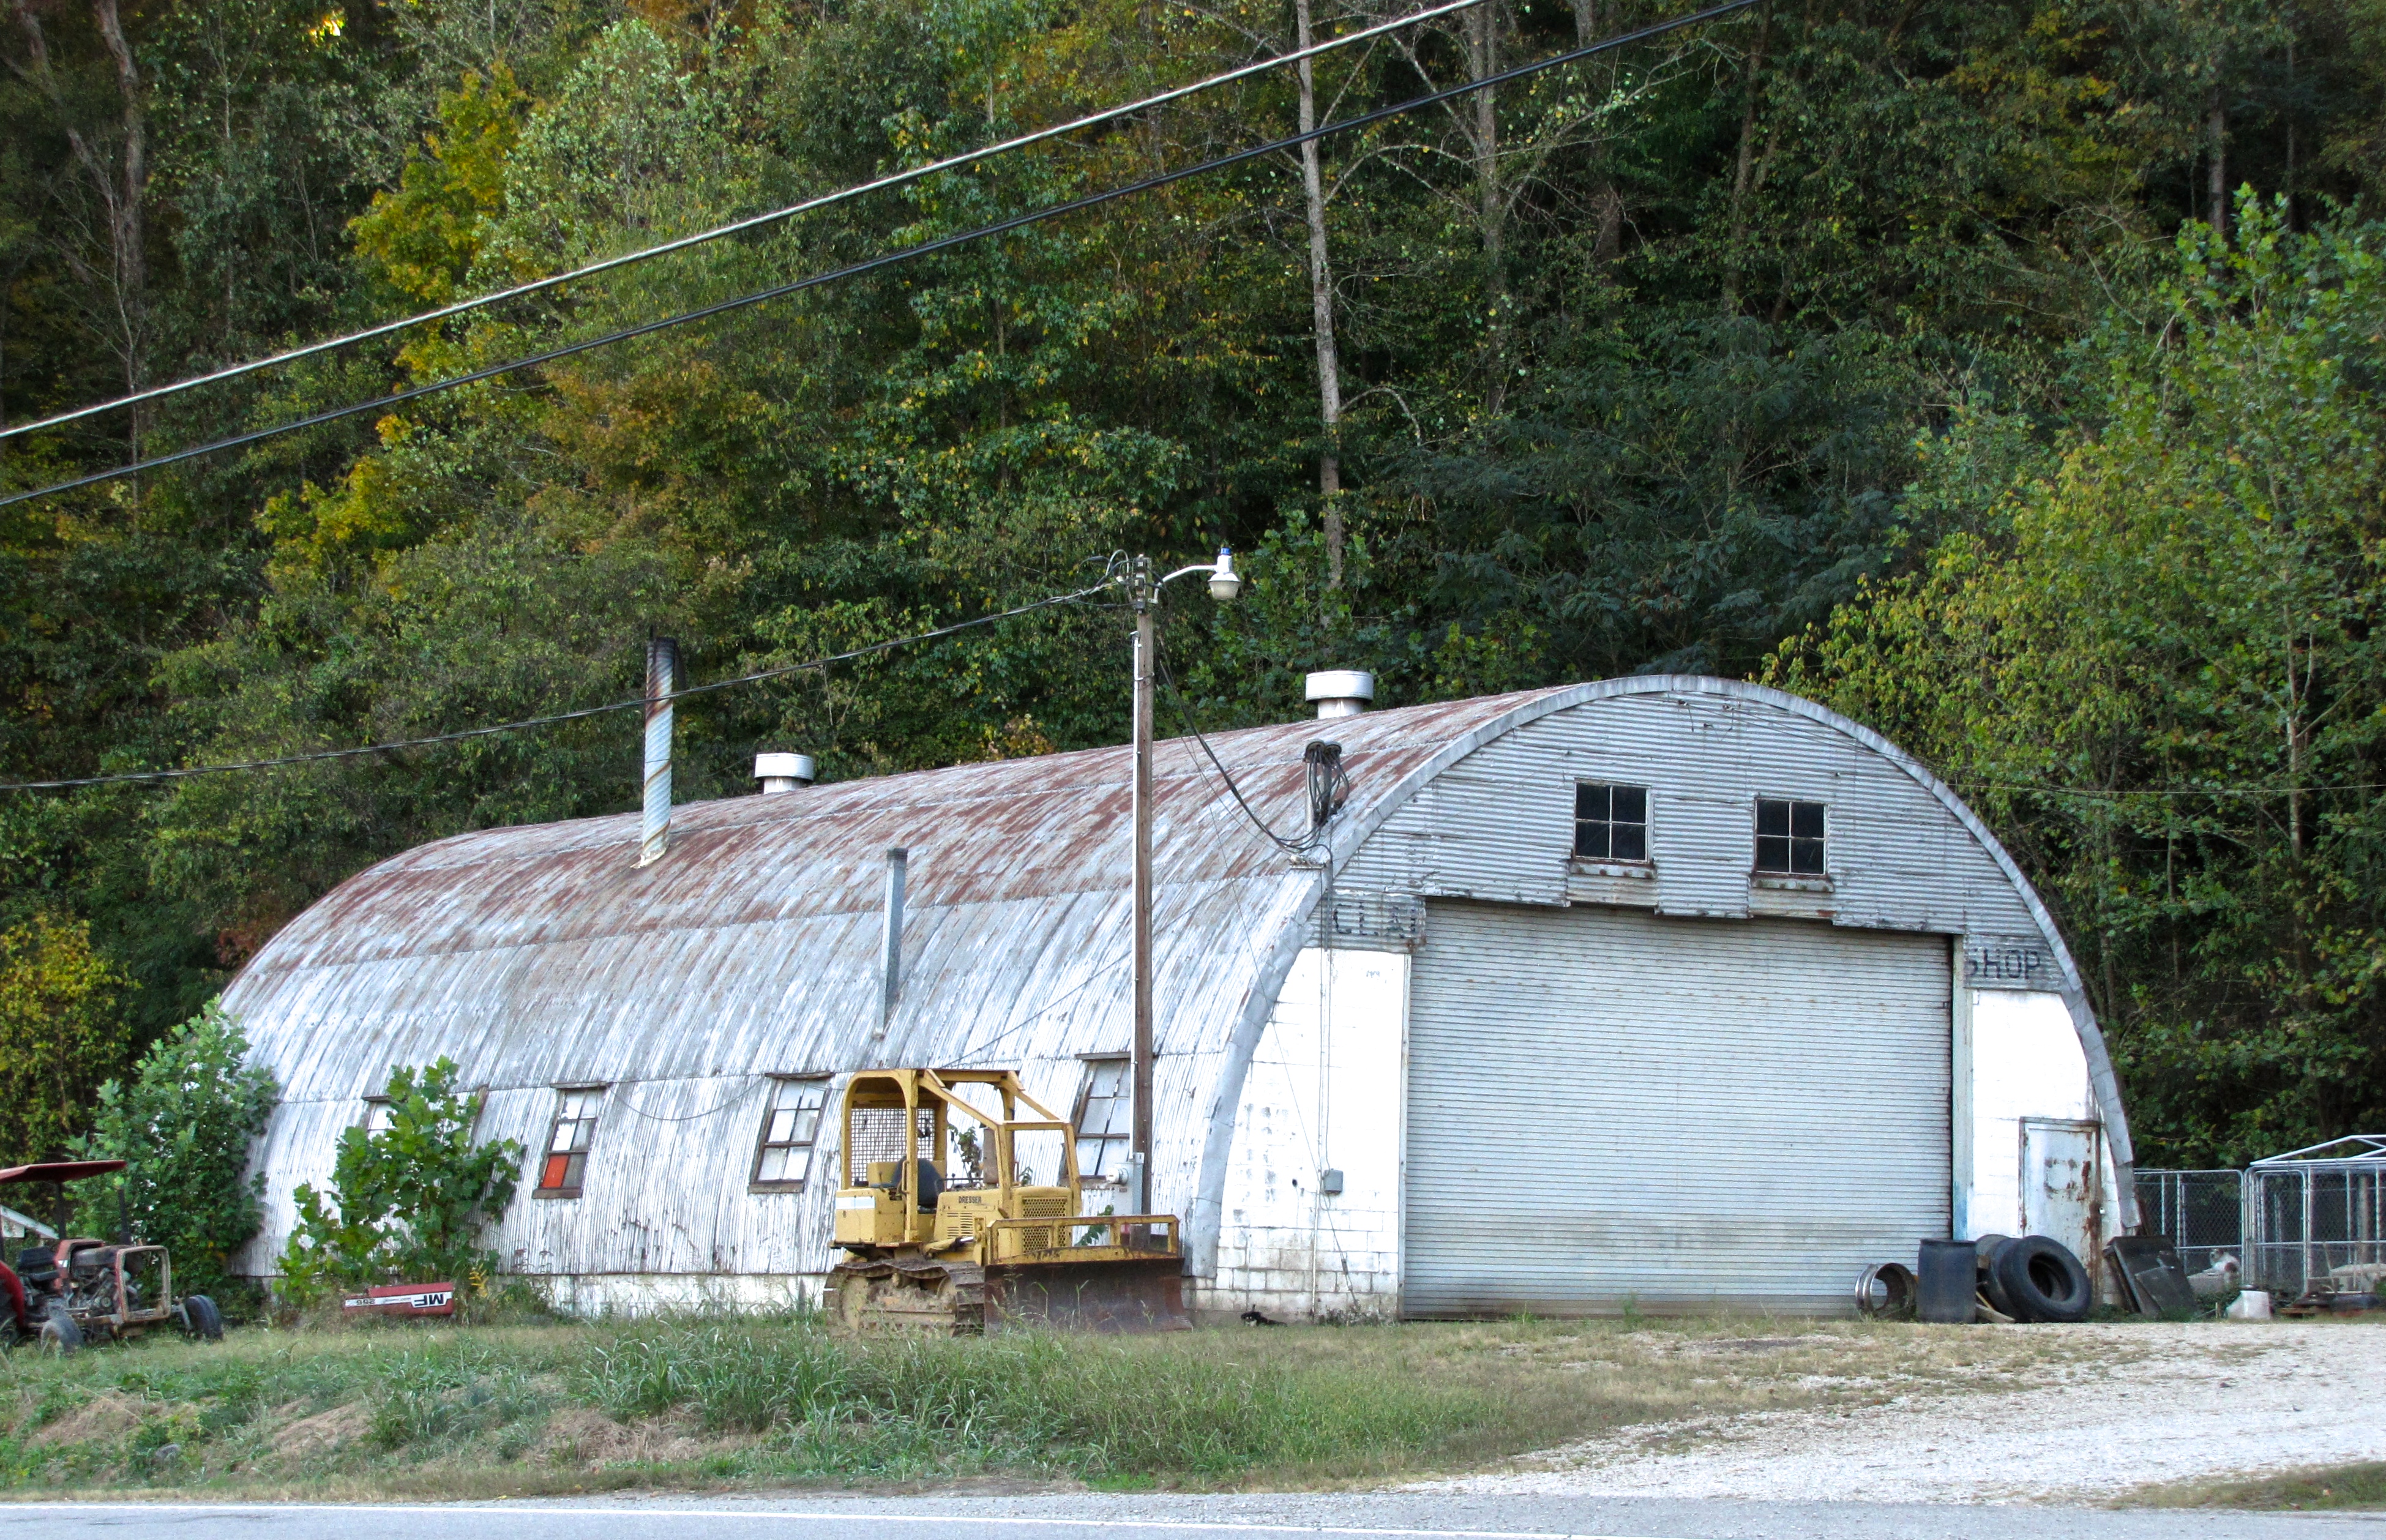 quonset hut in Tallahassee, FL